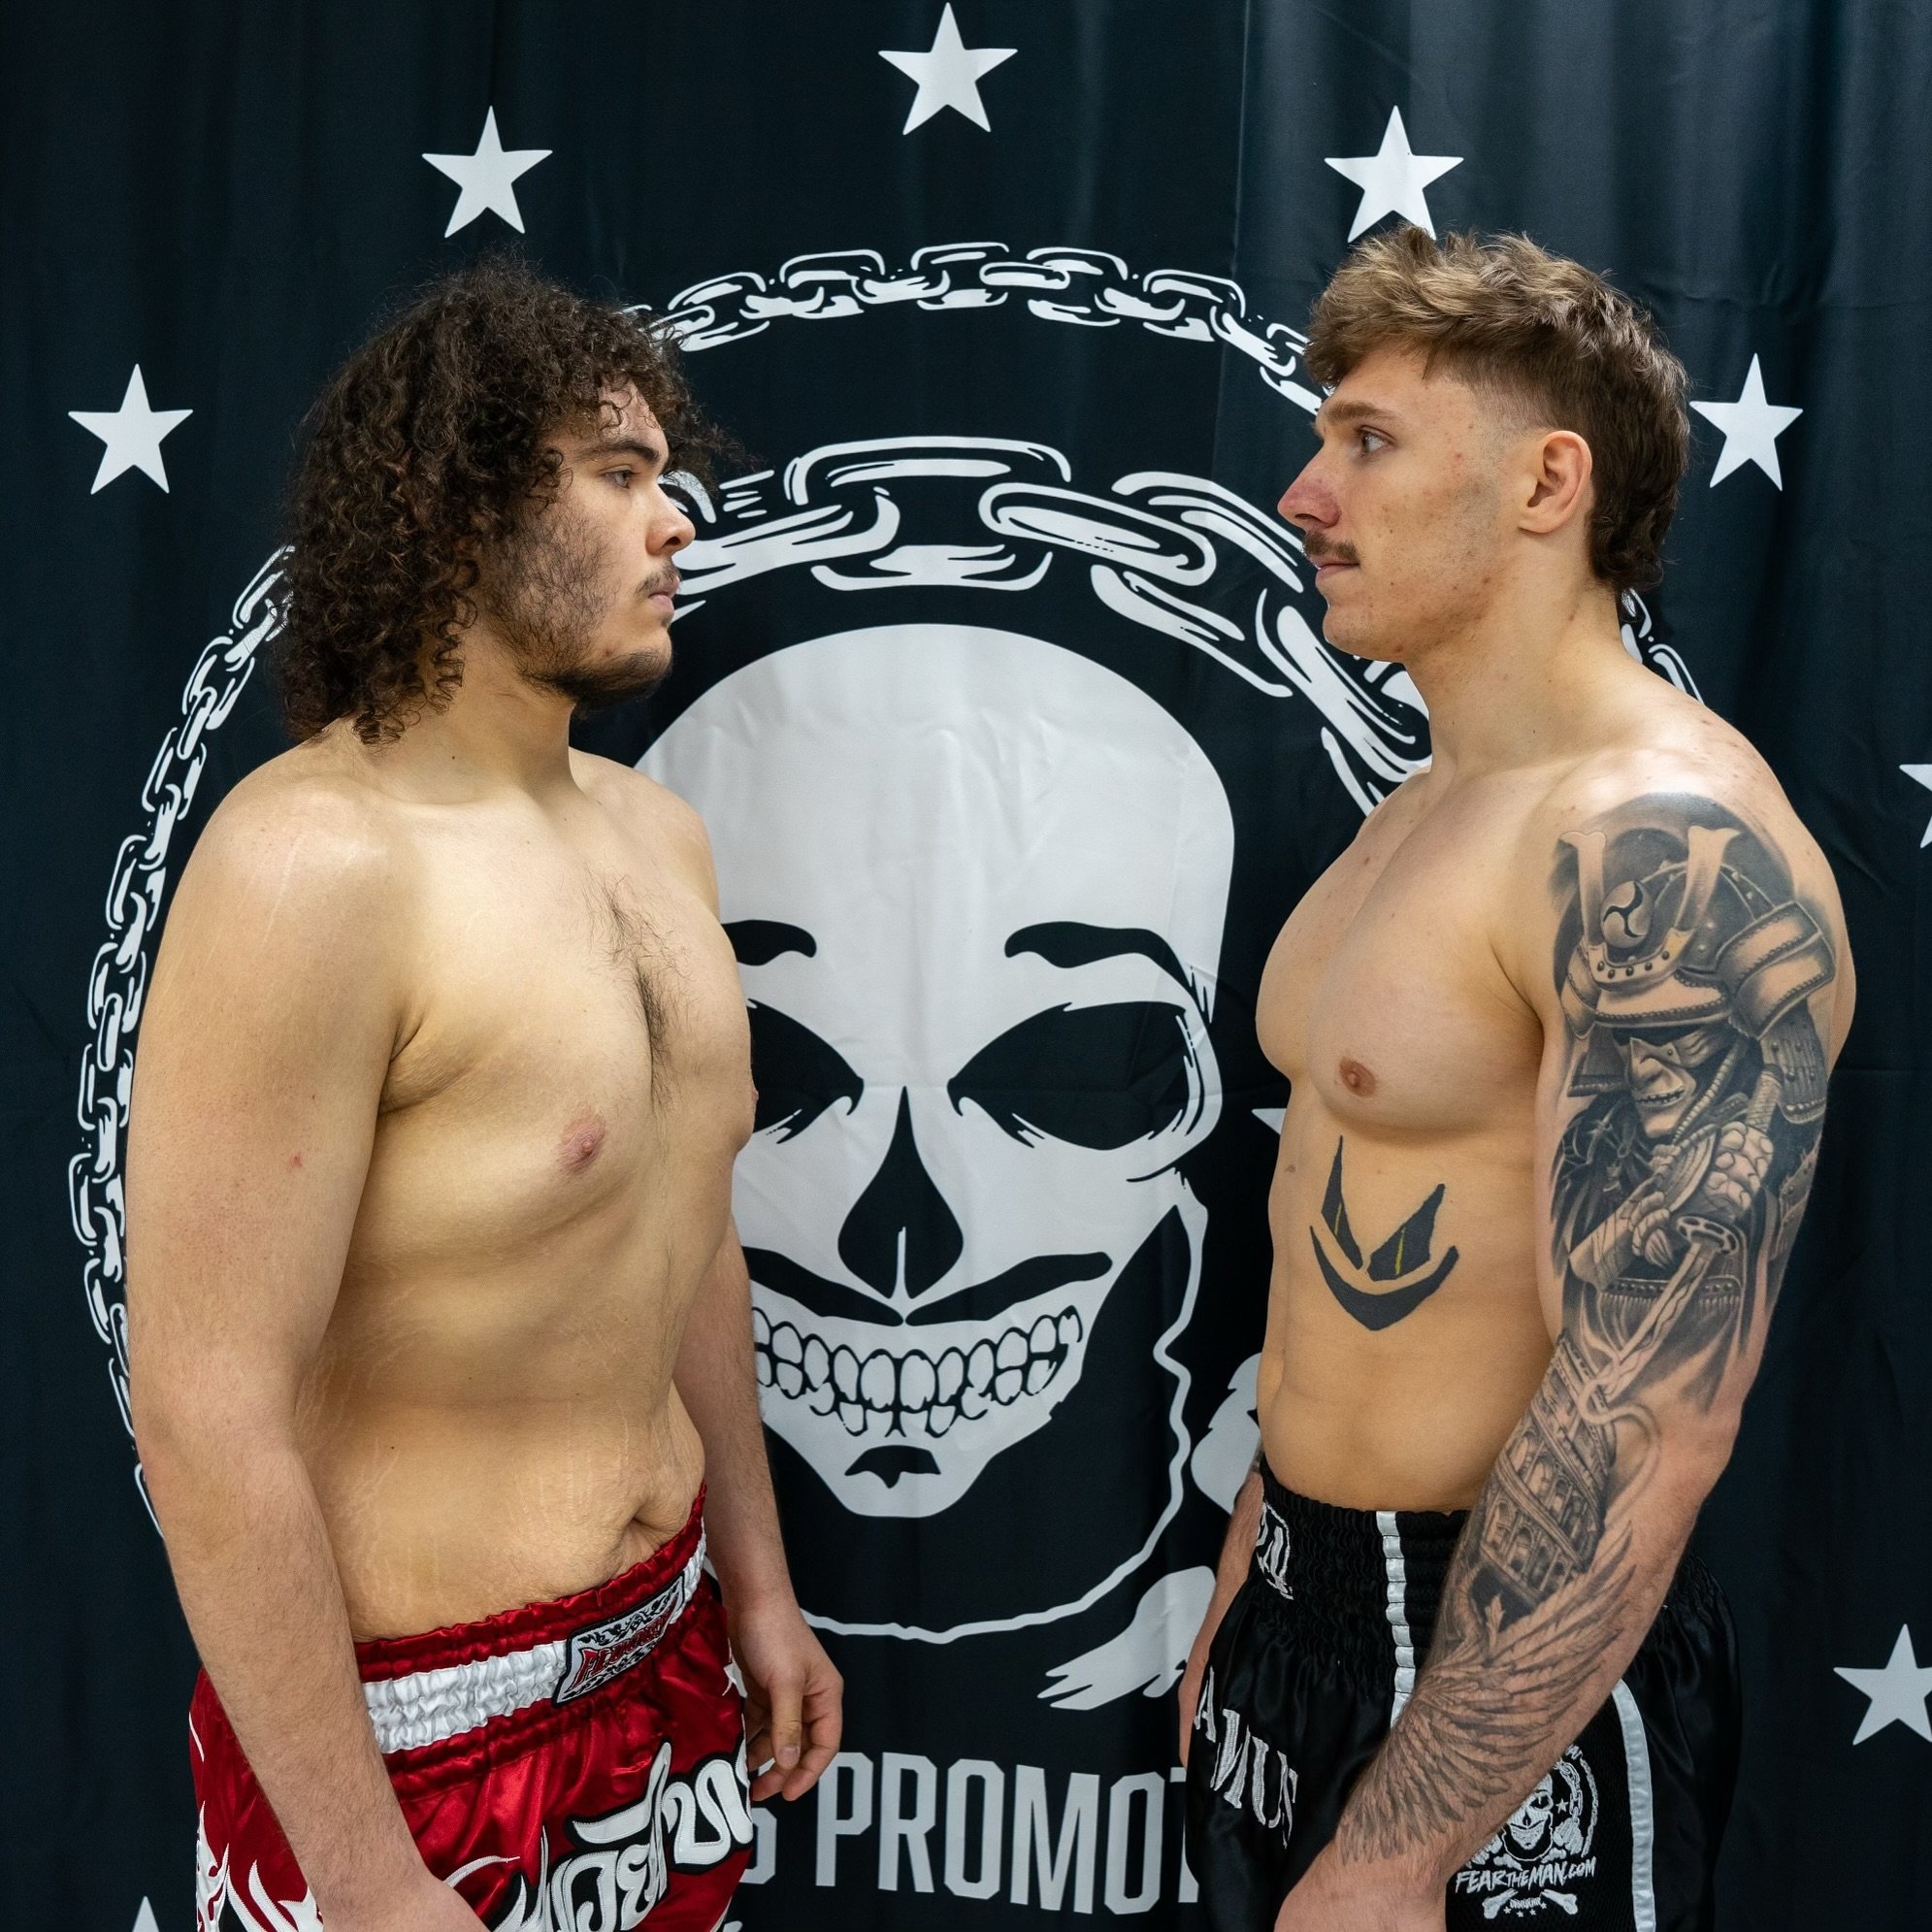 Big boys, big noise 😤
@jas0n_vill vs @juskajacob 
.
It&rsquo;s goes down tonight! Tickets will be available at the door! Can&rsquo;t make it? Order the pay-per-view! Link in bio
Doors open at 5:30pm
Show starts at 6:30pm
.
Venue: The PIAZZA
85 Execu